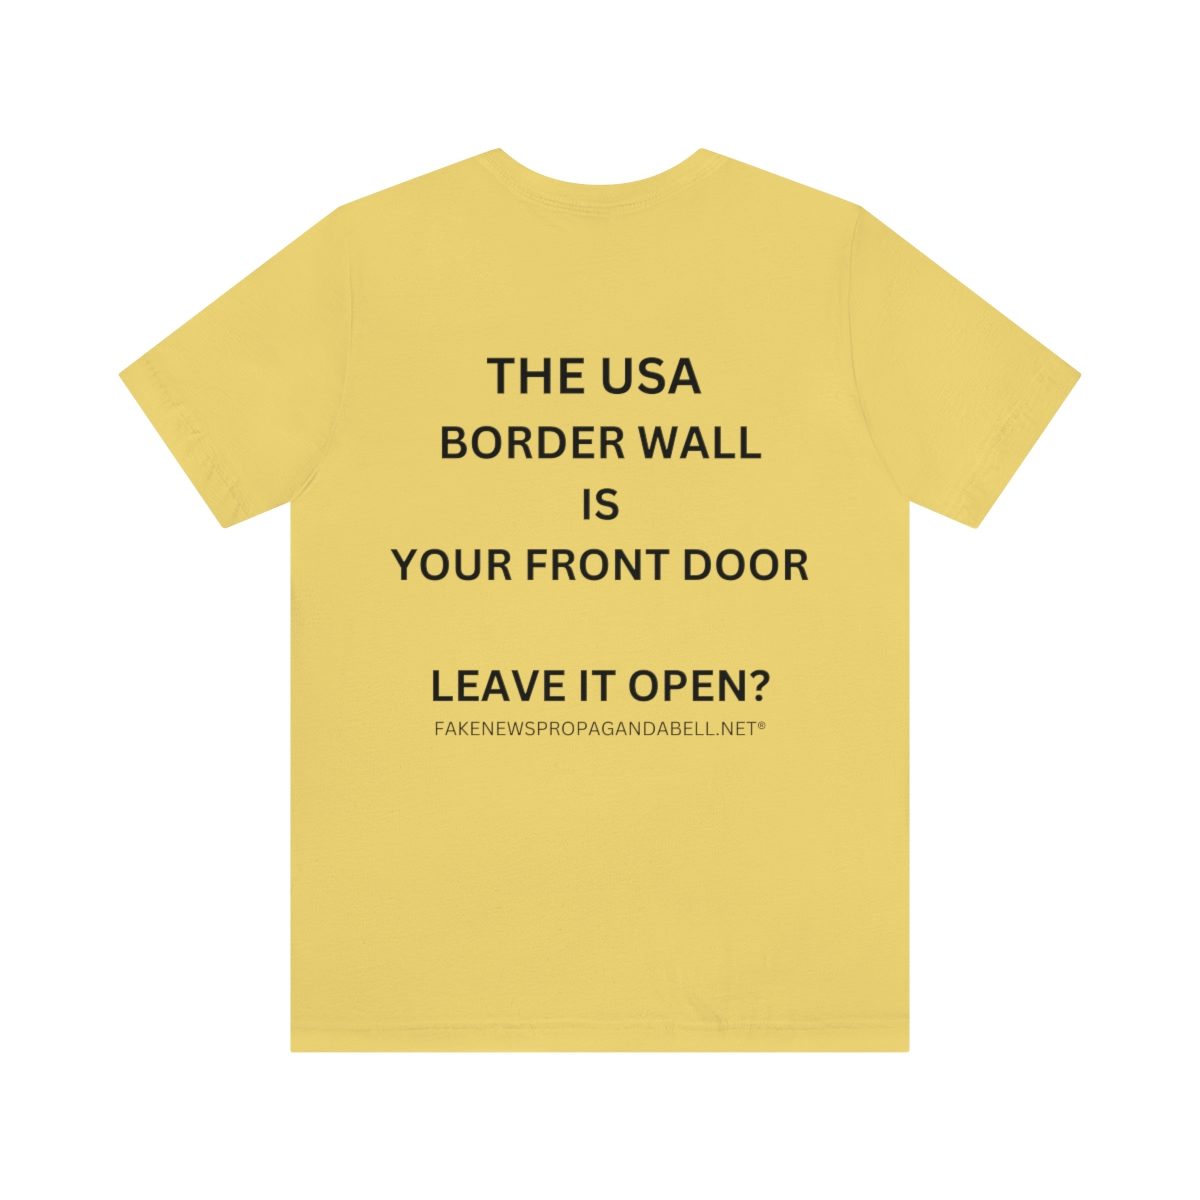 THE USA BORDER WALL IS YOUR FRONT DOOR…